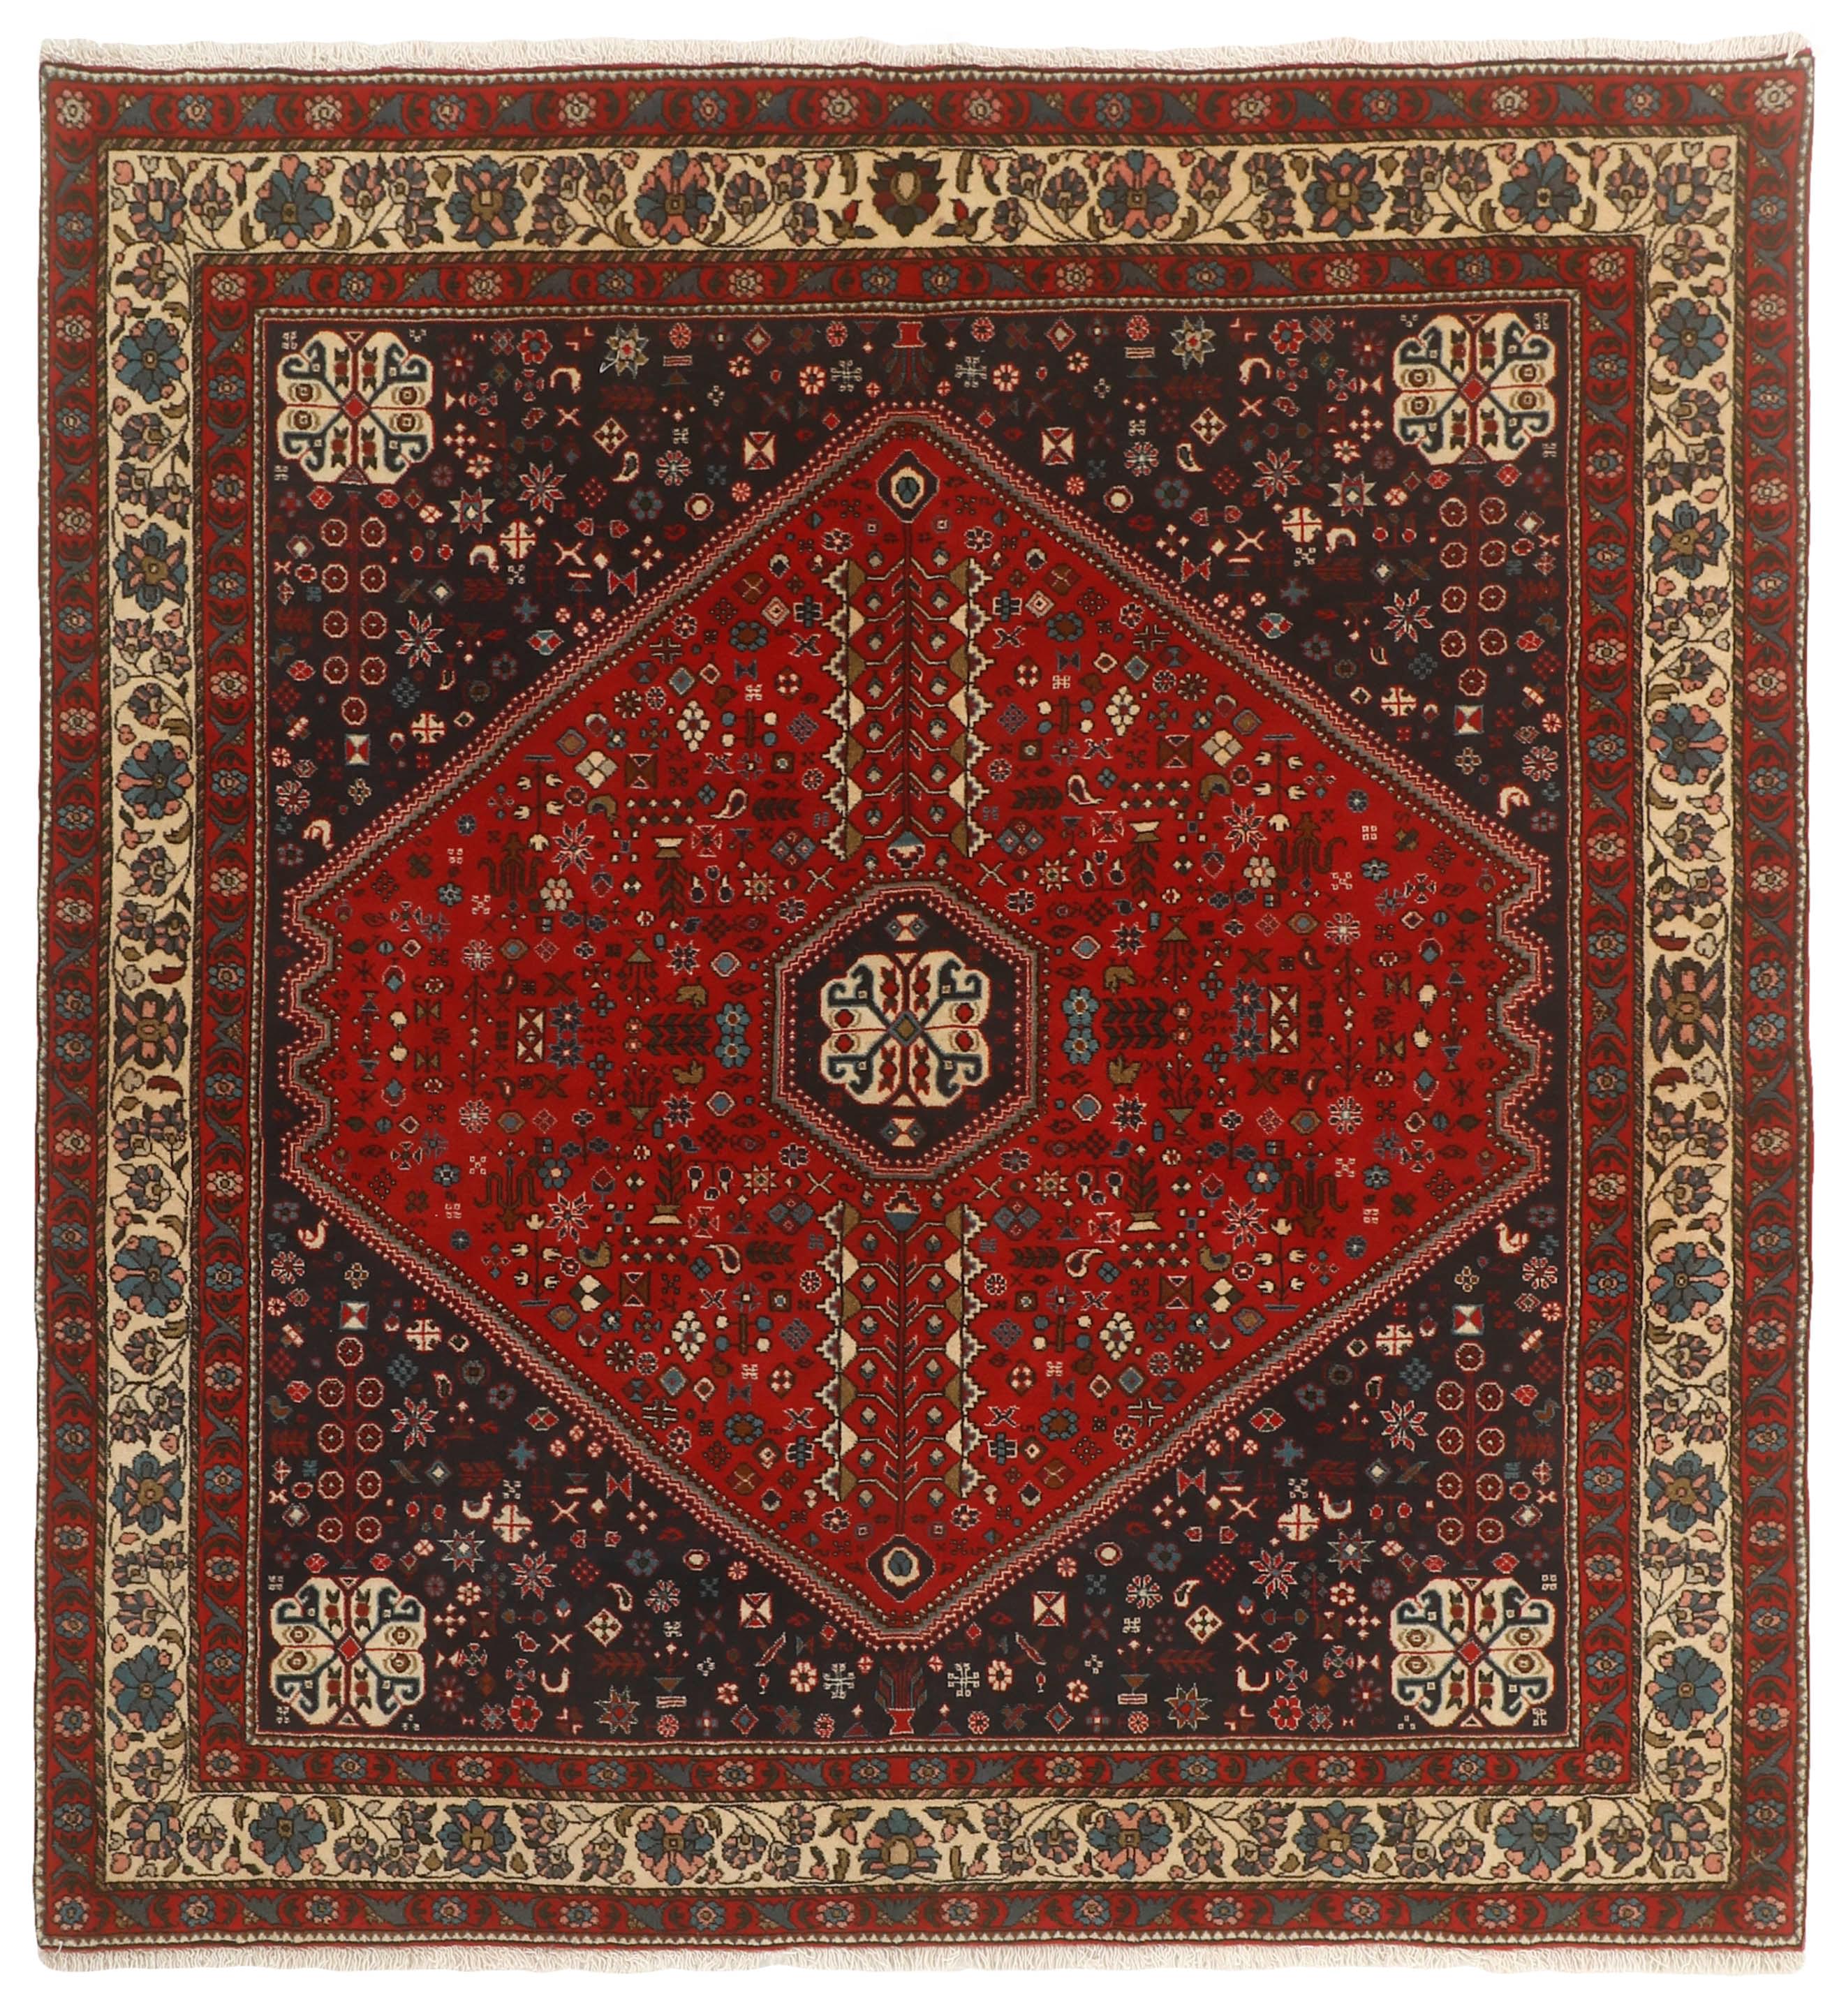 Authentic persian square rug with traditional tribal geometric design in red, ivory, black and brown